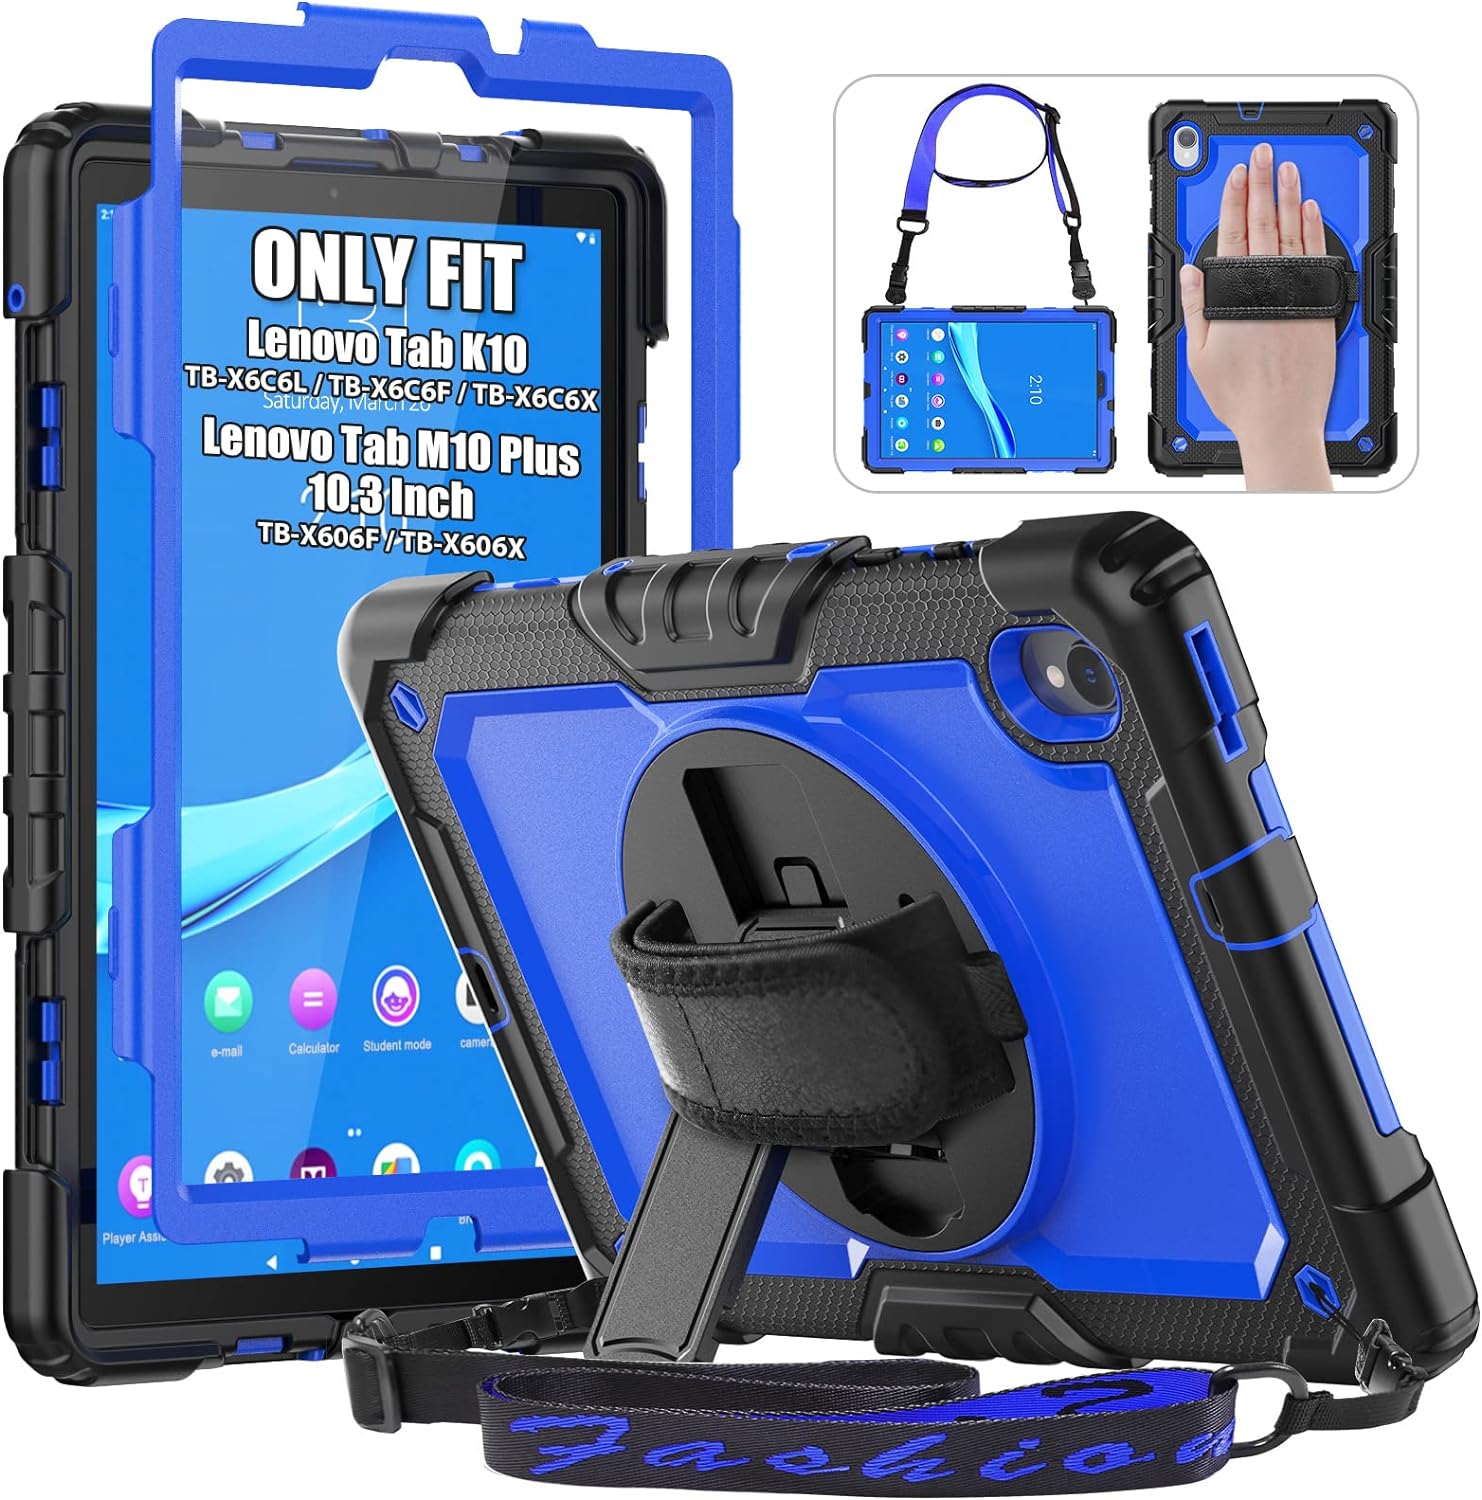 HXCASEAC Shockproof Case for Lenovo Tab K10 / Lenovo Tab M10 Plus 2nd Gen Case 10.3 inch, Protective with 360° Hand Strap/Screen Protector for TB-X606F / TB-X606X / TB-X6C6 - Blue